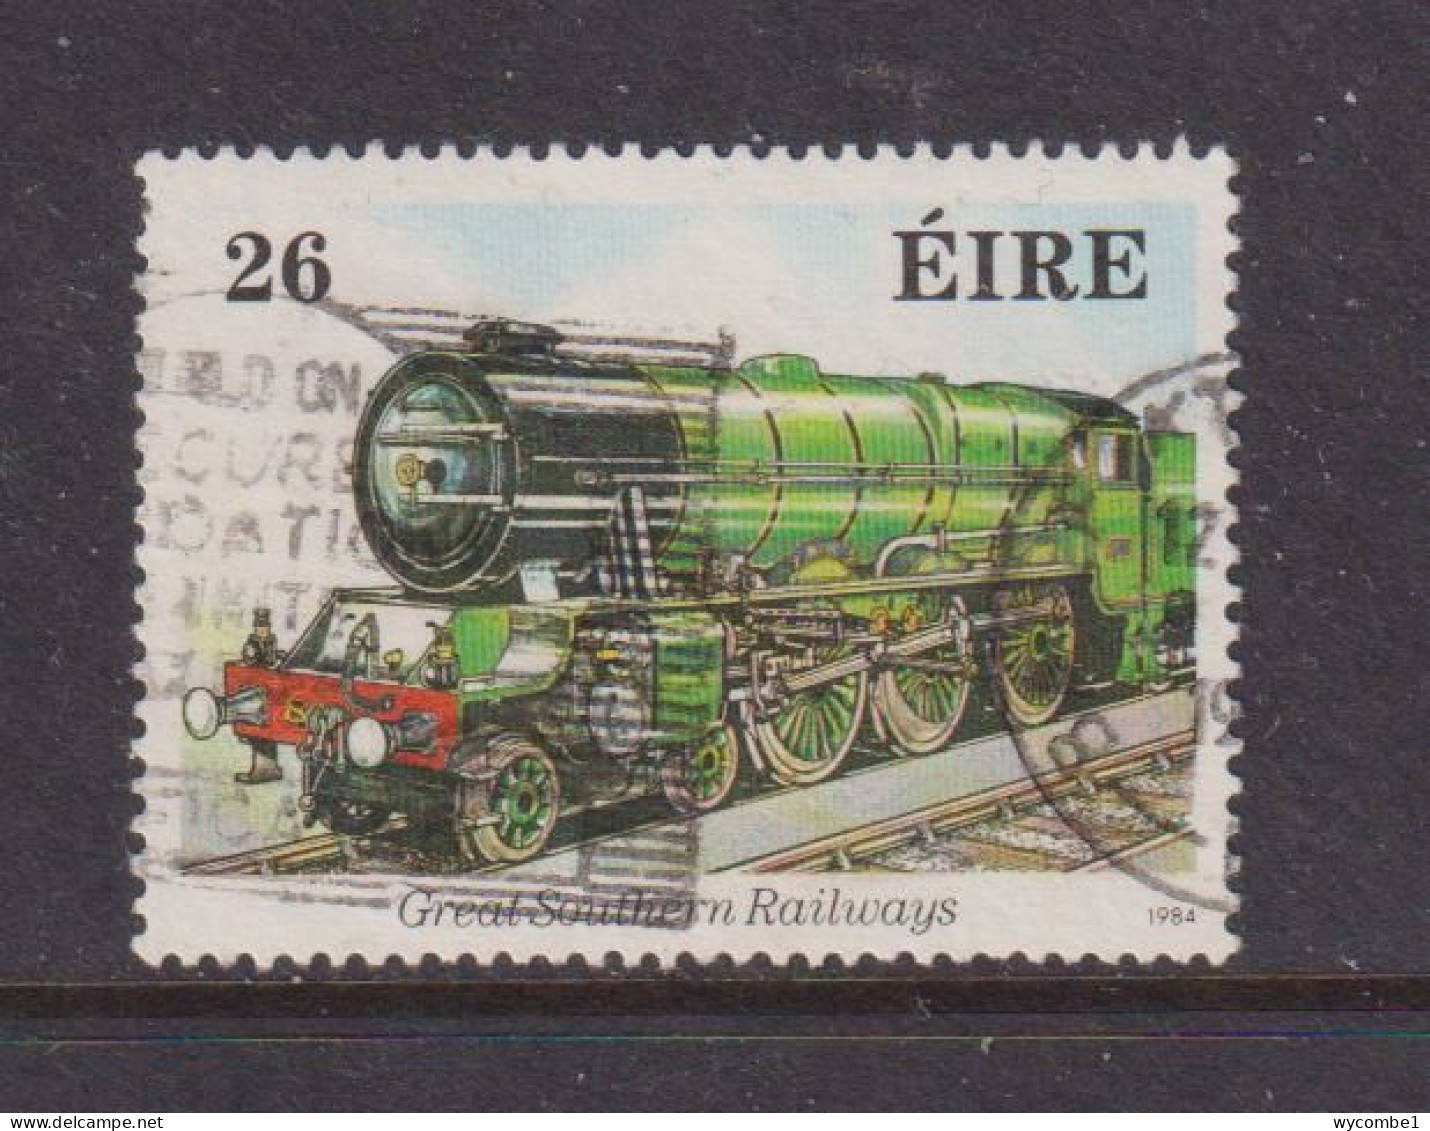 IRELAND - 1984  Train  26p  Used As Scan - Used Stamps